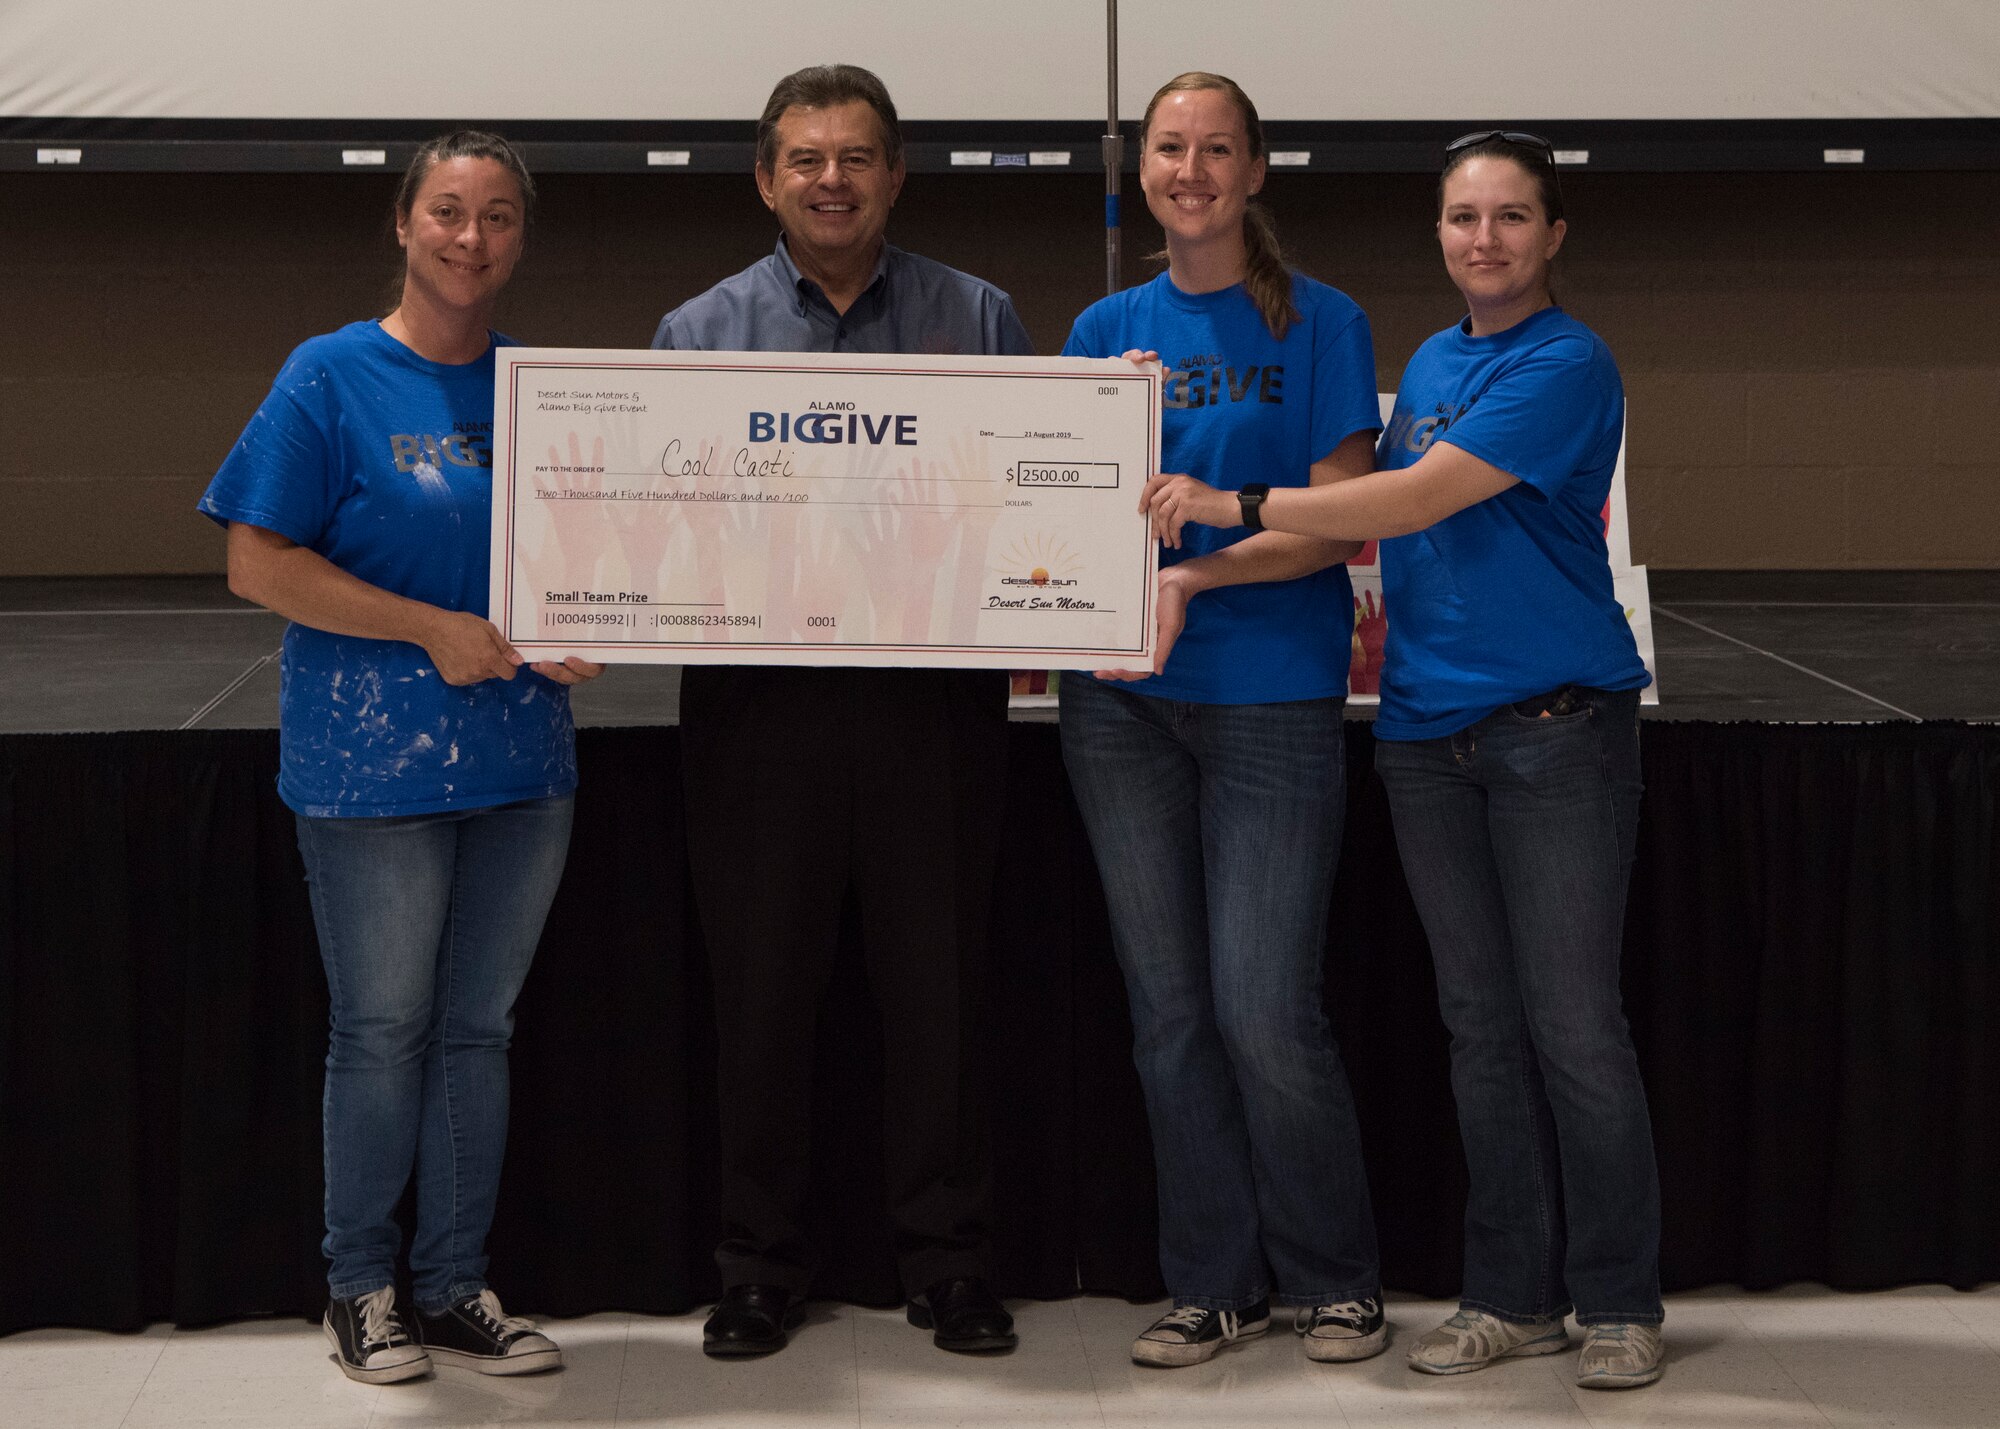 Members of team Cool Cacti accept a check for winning in the small team category as part of the 2019 Alamo’s Big Give closing ceremony, August 22, at the Willie Estrada Civic Center in Alamogordo, N.M. This was the 12th year of Alamo’s Big Give which has saved the Otero community over $2,000,000 through community service. (U.S. Air Force photo by Staff Sgt. BreeAnn Sachs)